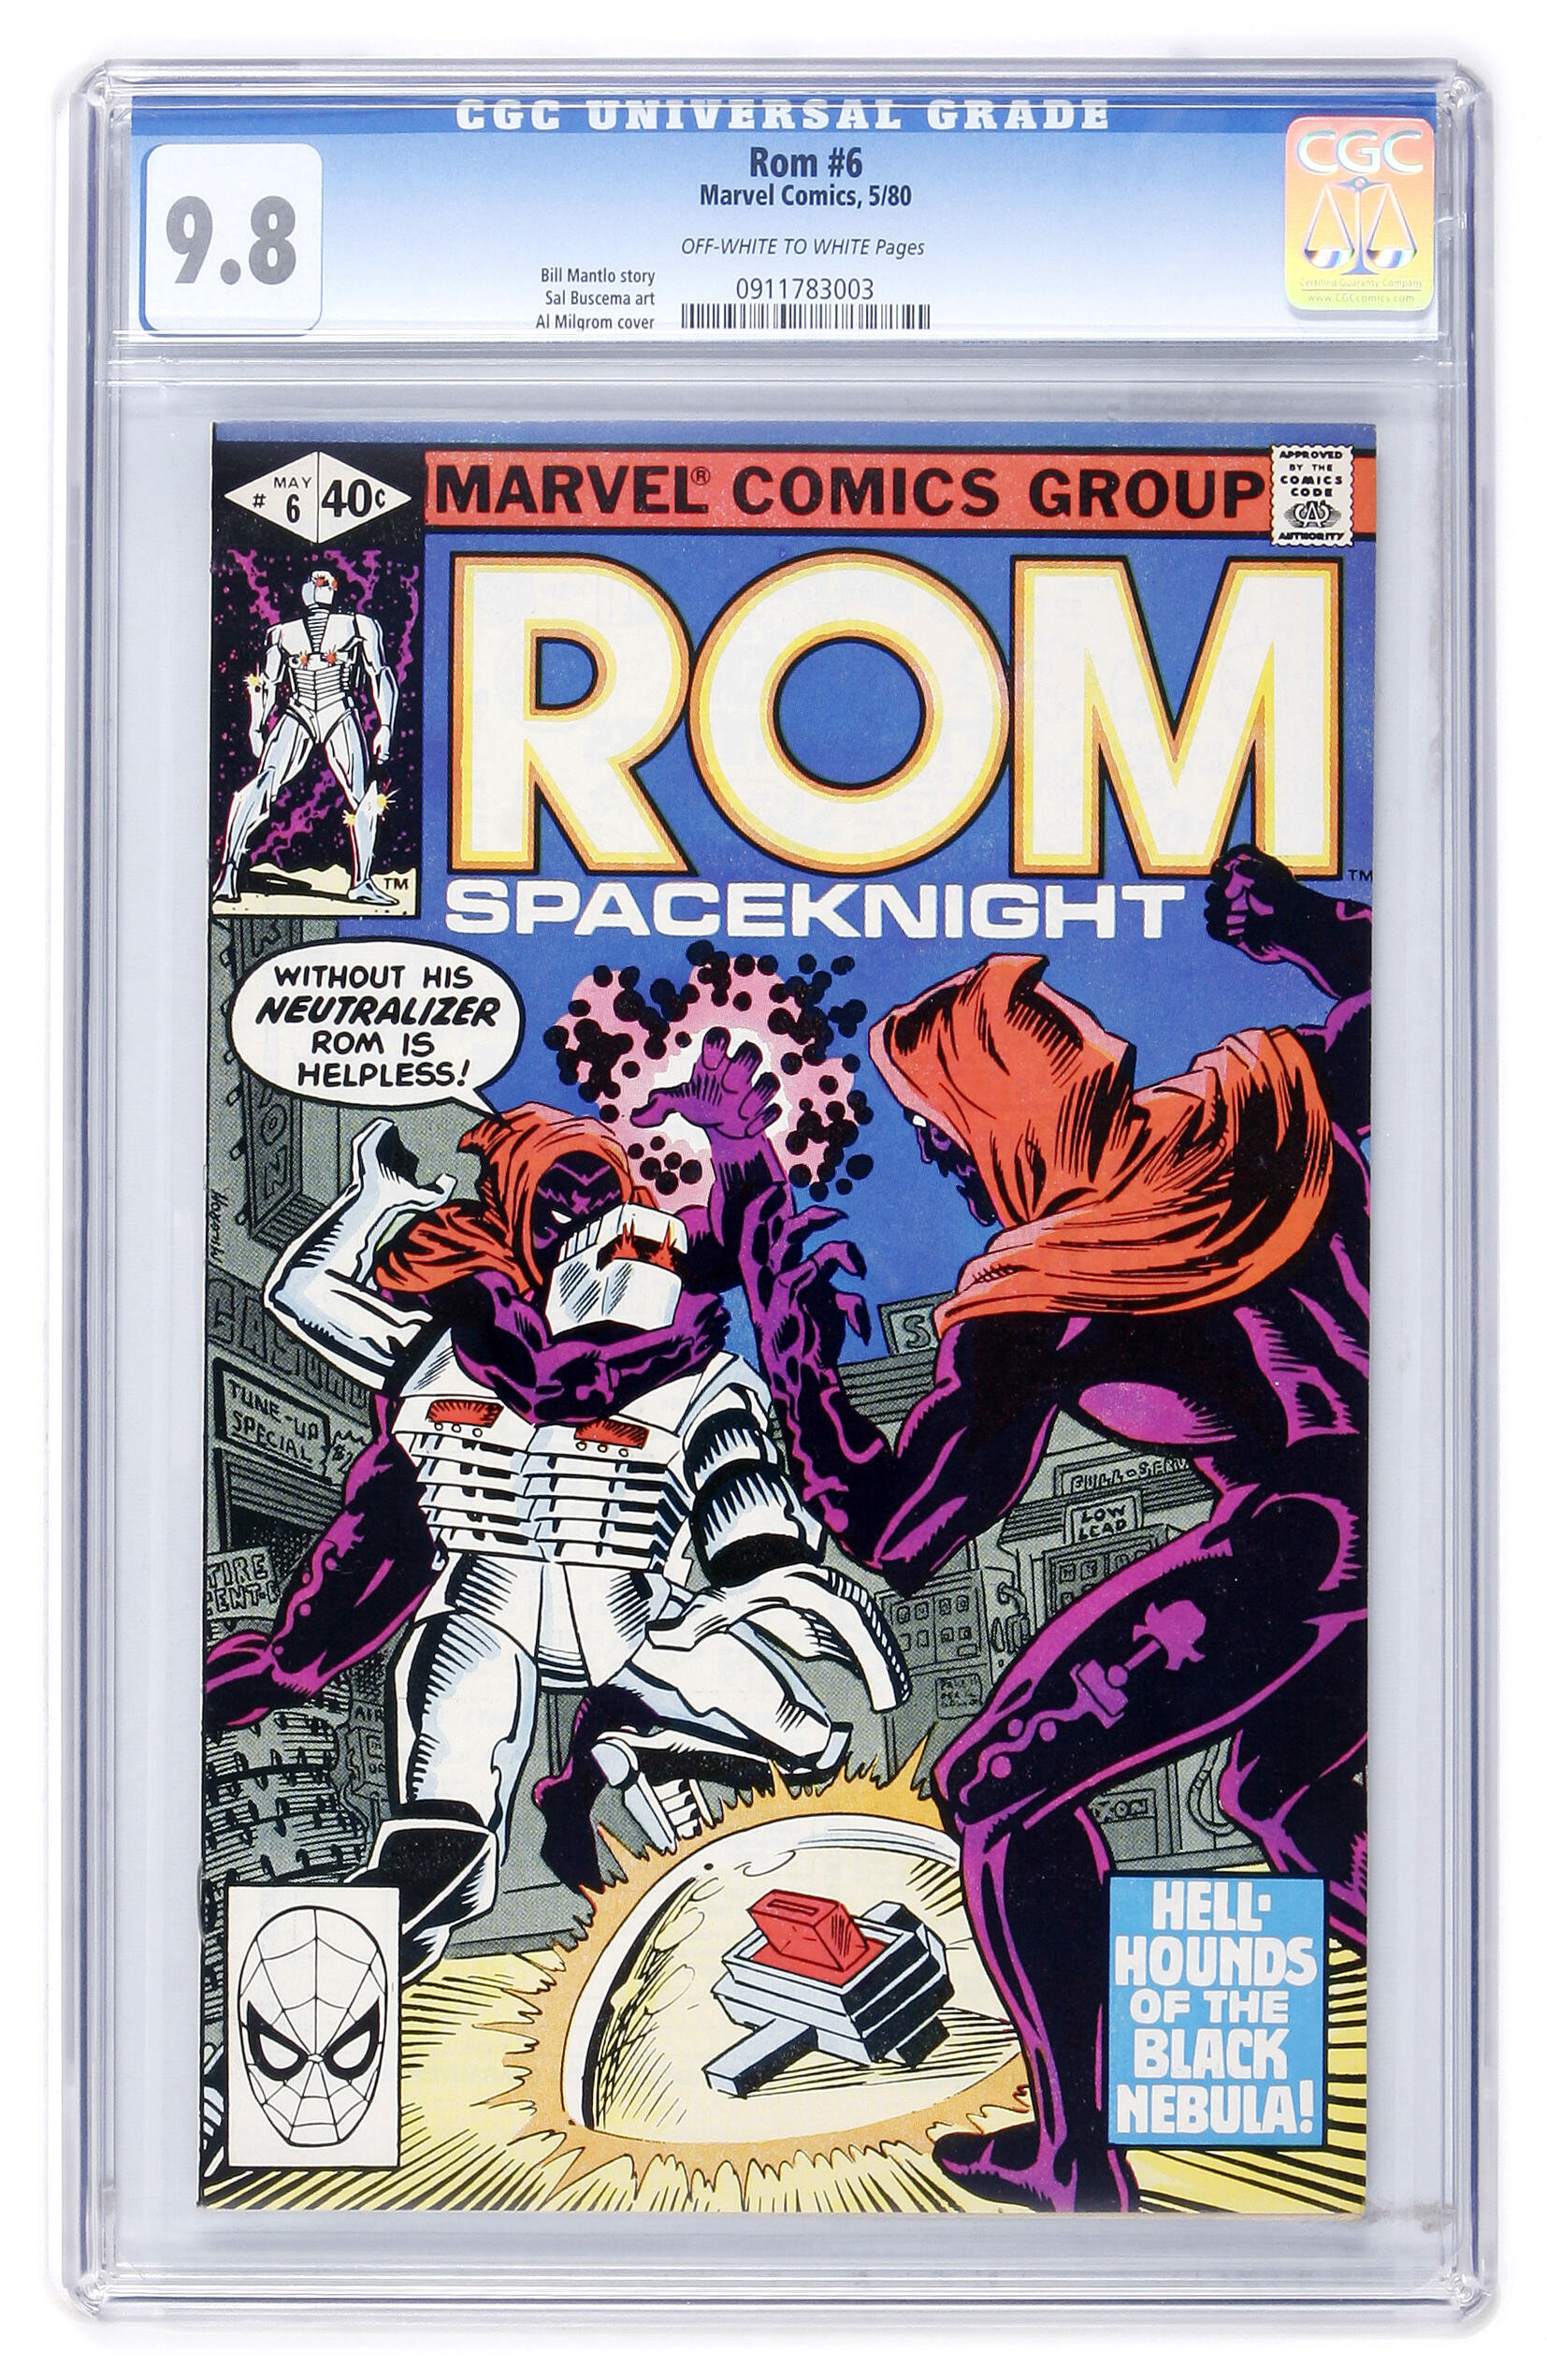 musikkens Alfabetisk orden masser How Much Is ROM #6 Worth? Browse Comic Prices | Heritage Auctions